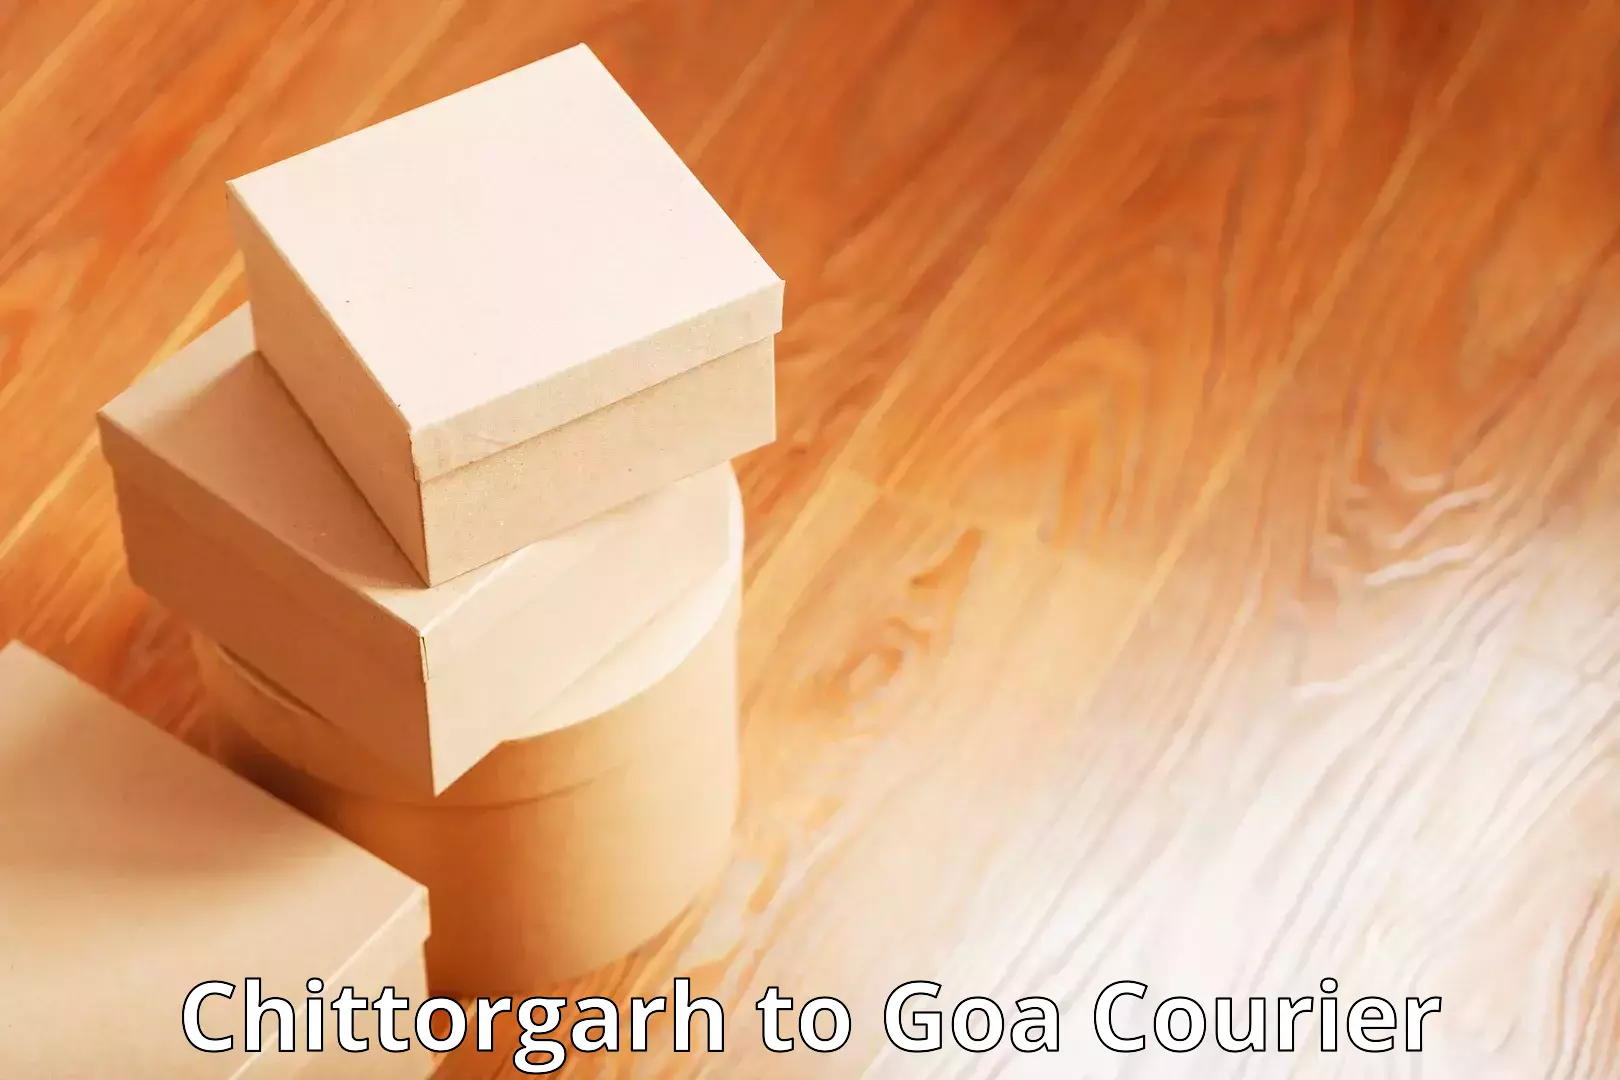 Parcel handling and care Chittorgarh to Goa University